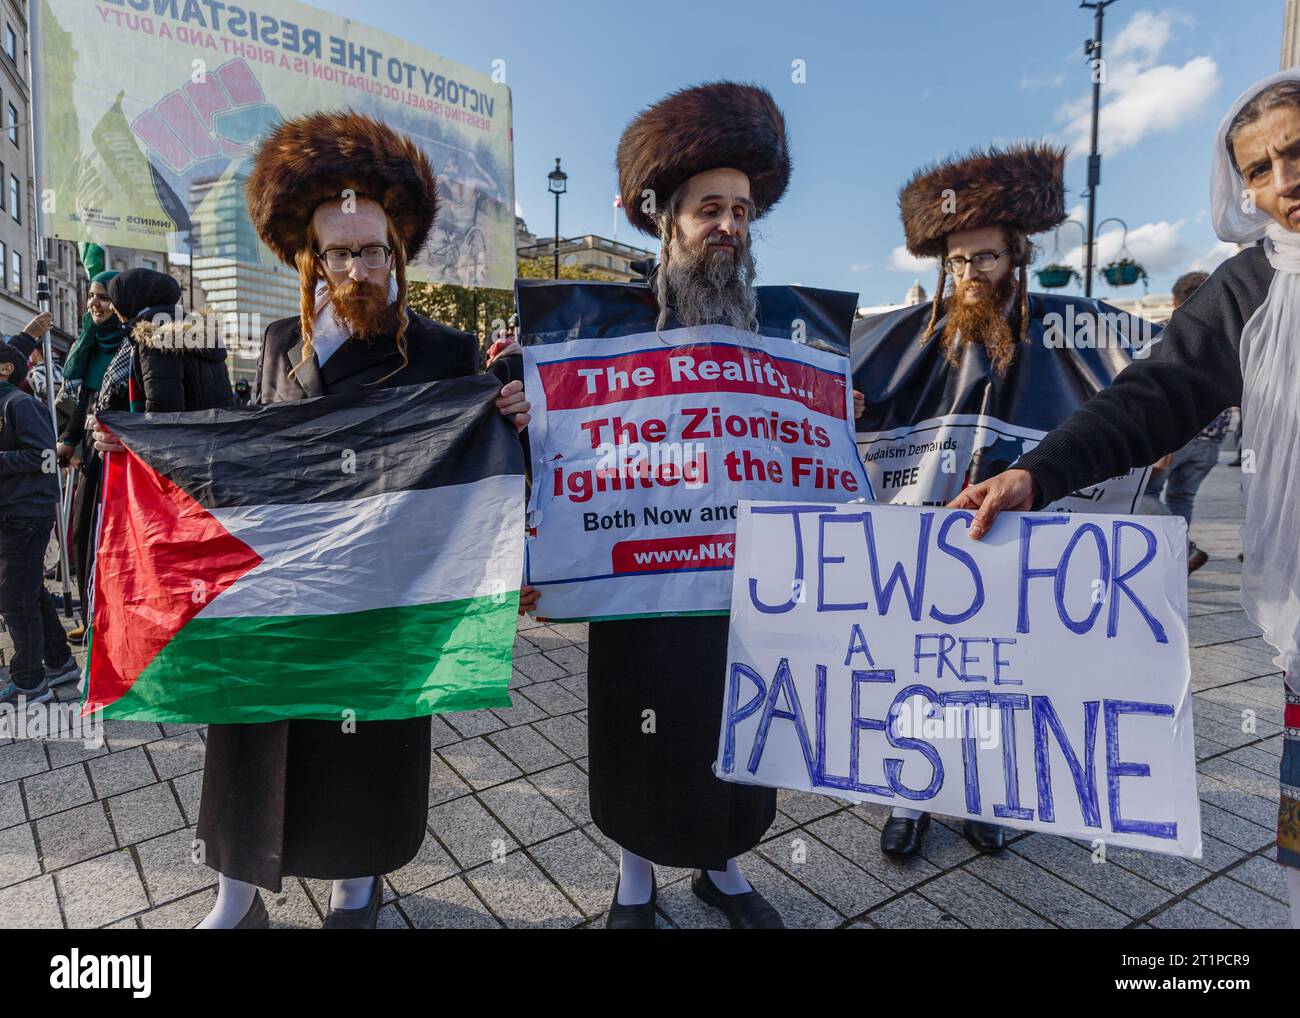 Anti-Zionist and pro Palestine Haredi jews, and 'Jews For A Free Palestine' at the demonstration in London. Stock Photo